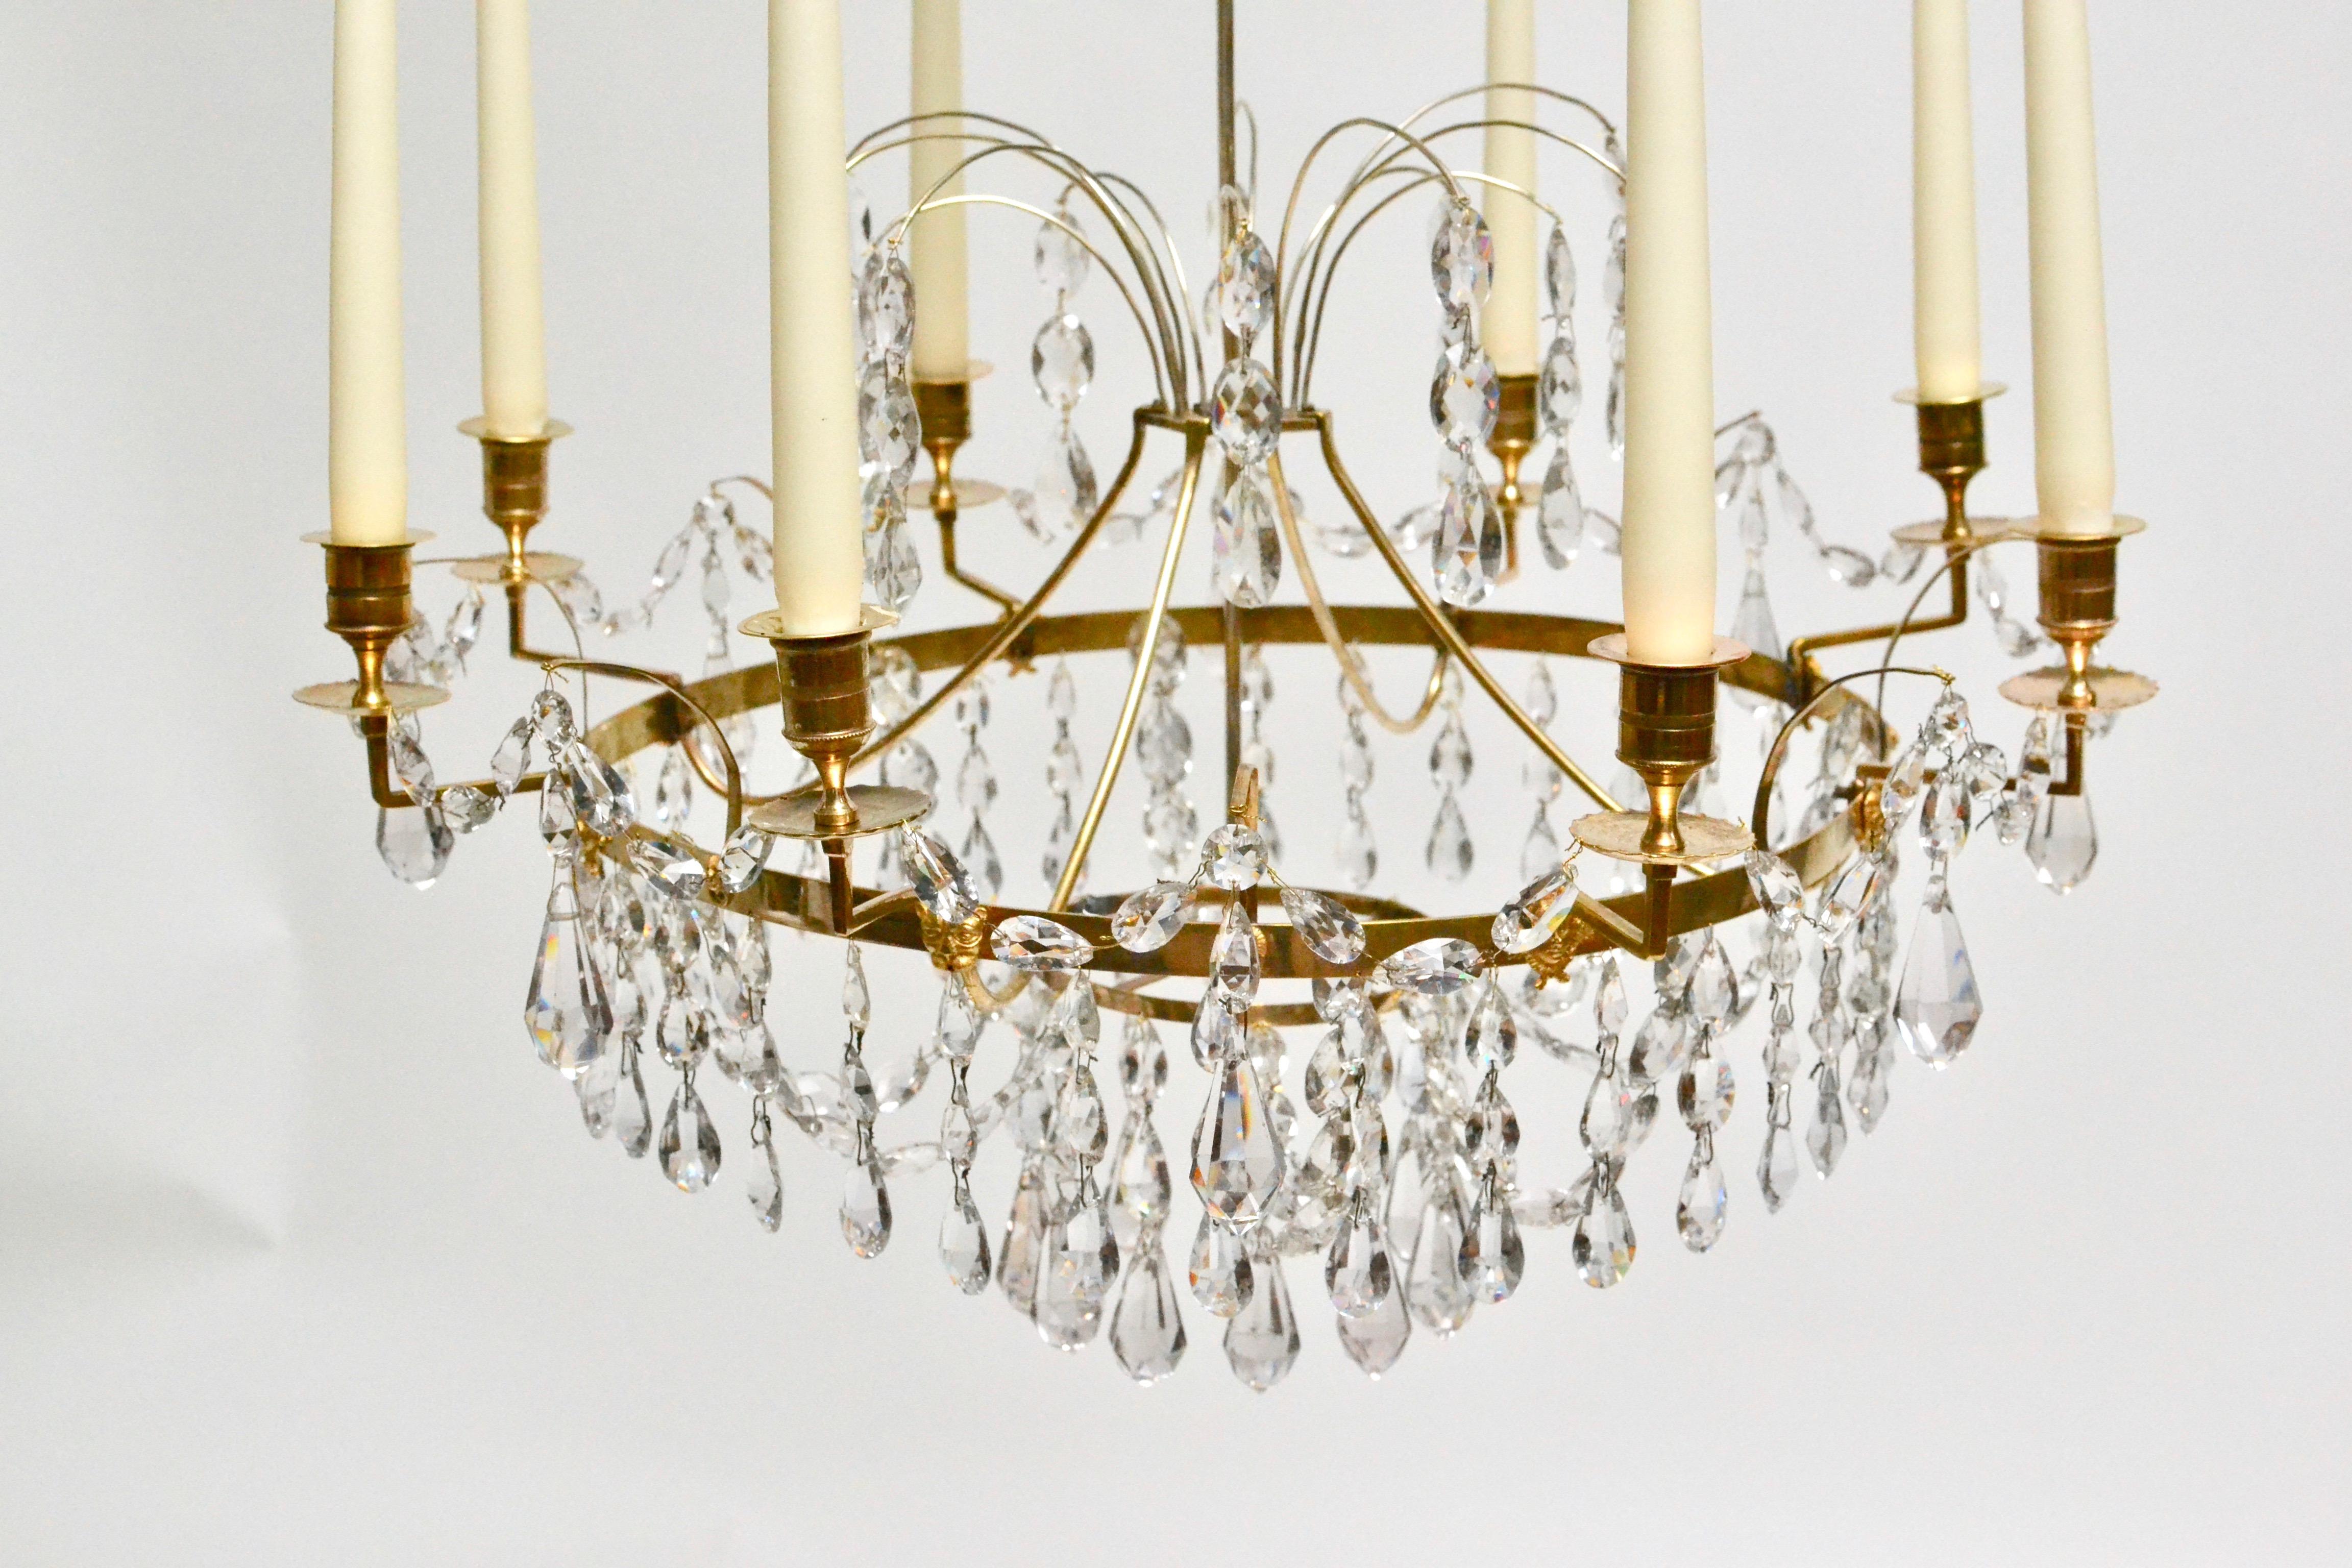 Swedish neoclassical ormolu and cut-glass six-light chandelier made in Stockholm, circa 1790. The corona issuing droplet-hung sprays and hanging from it are cut-glass chains, the main circlet with ormolu lion heads mounted is attached through four